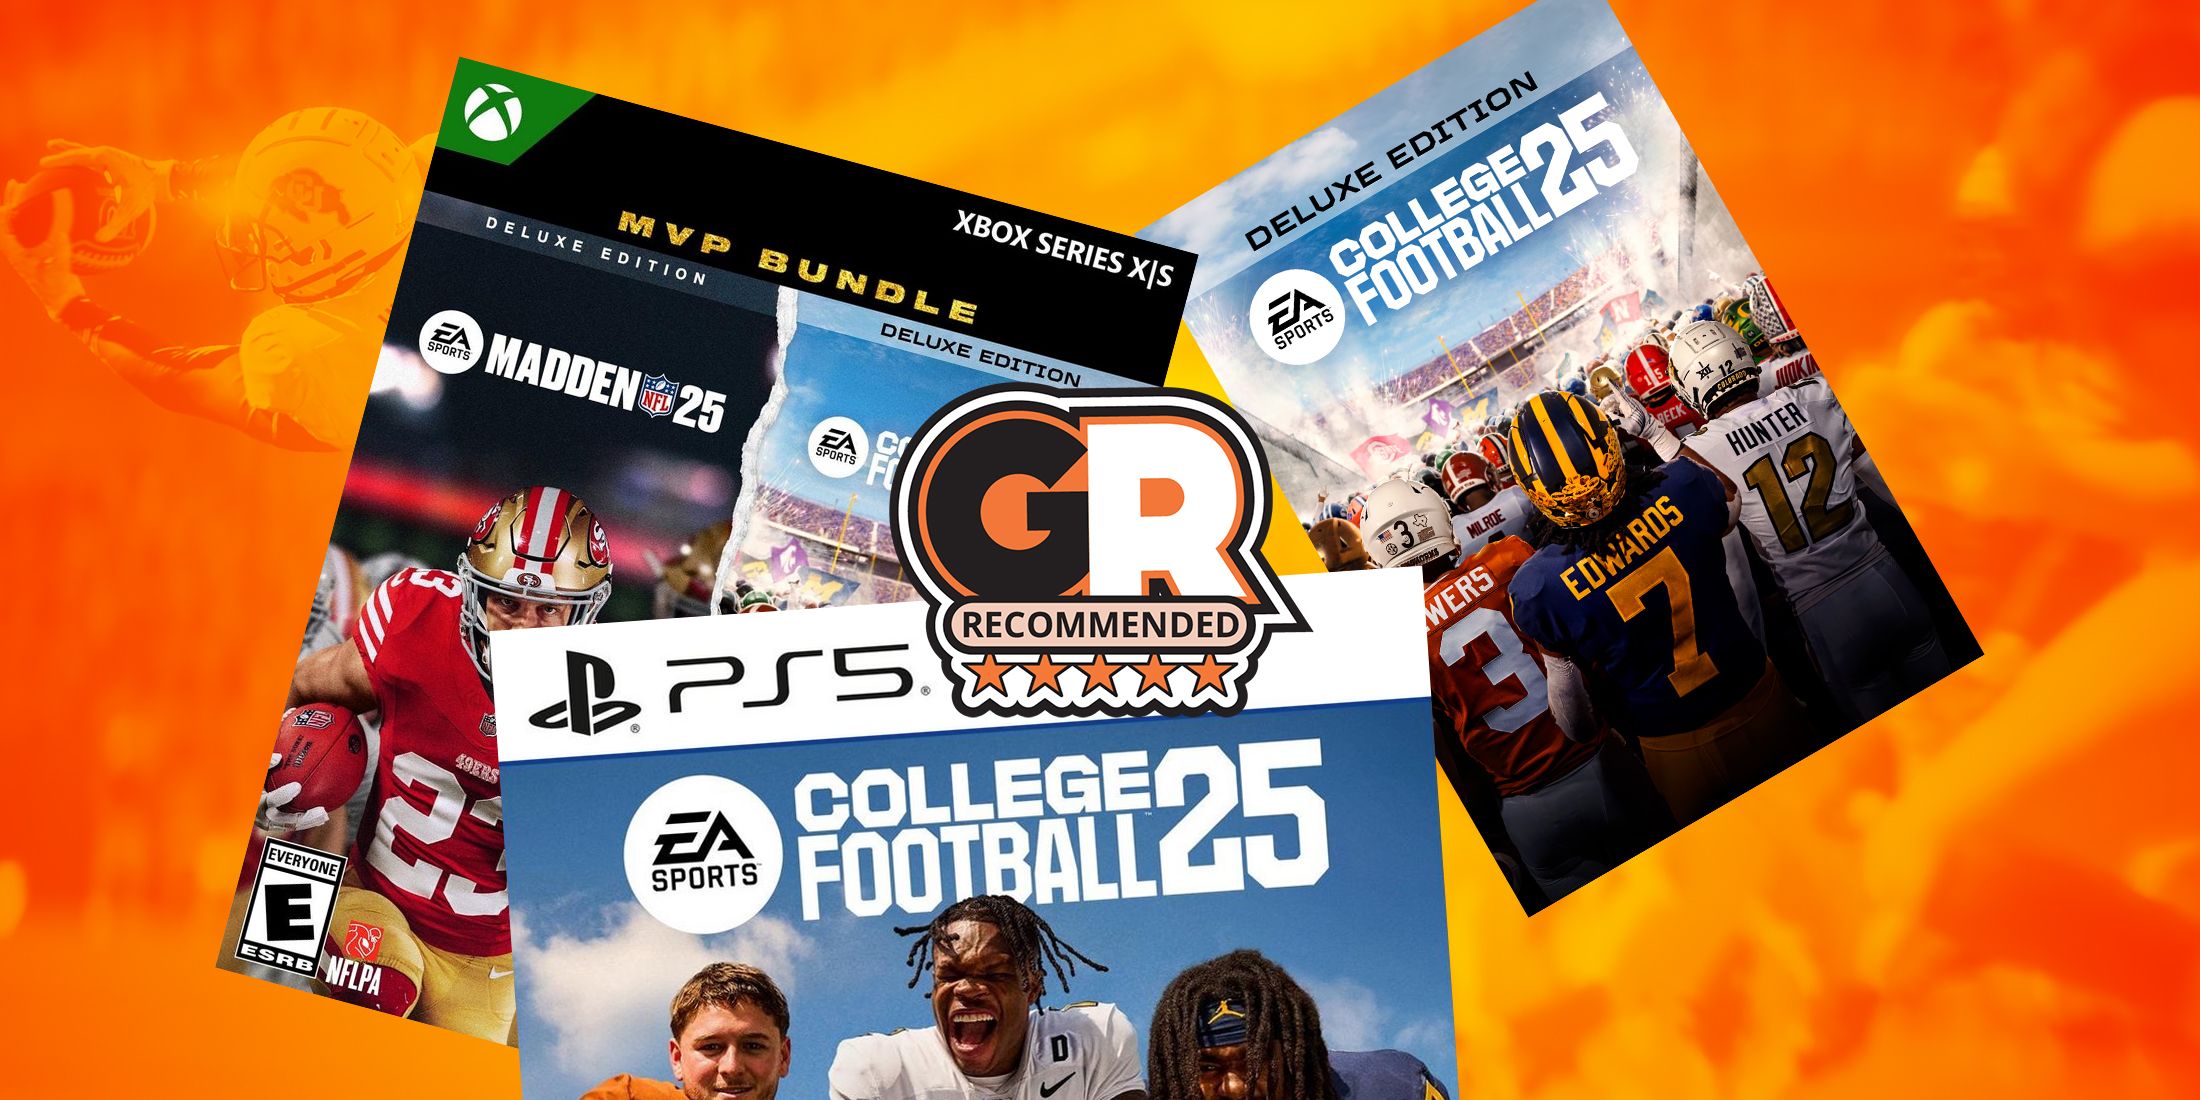 EA Sports College Football 25: Where And What Edition To Buy?